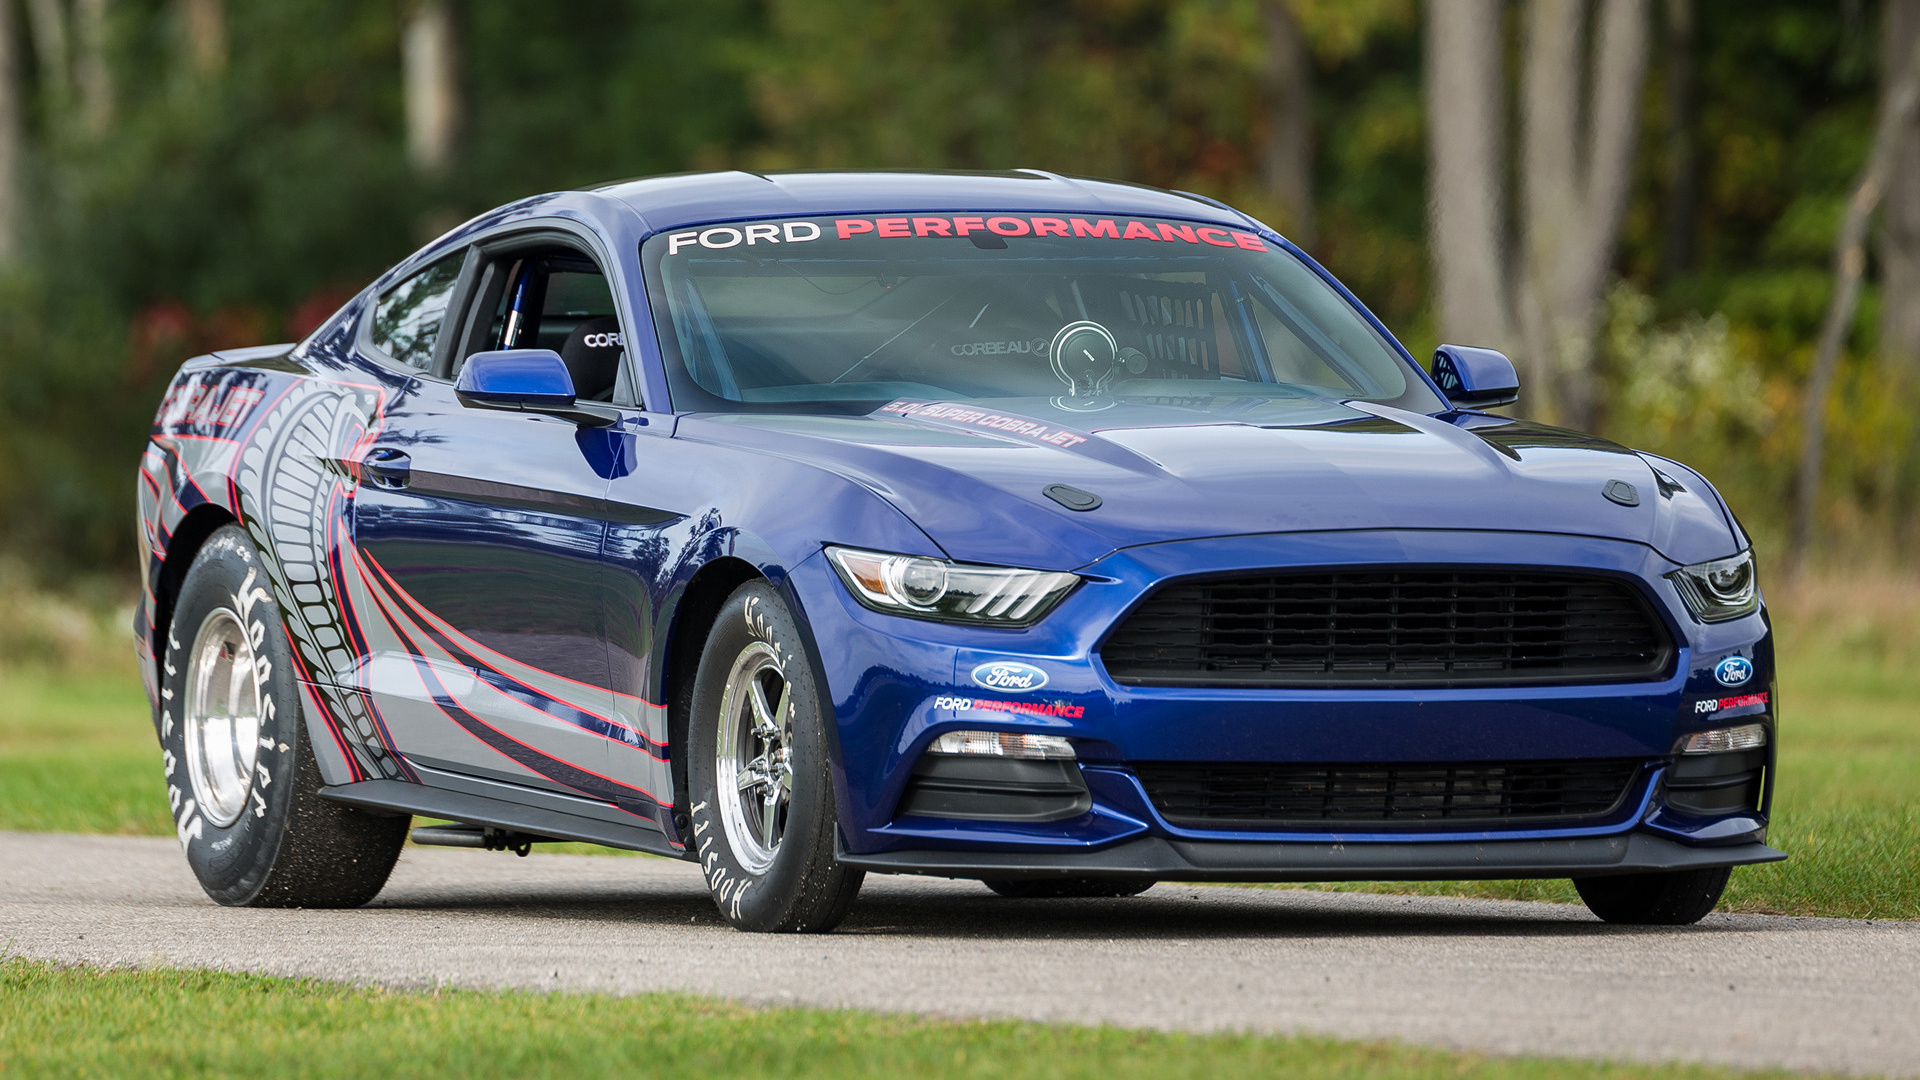 Mustang Of The Day: 2016 Ford Mustang Cobra Jet